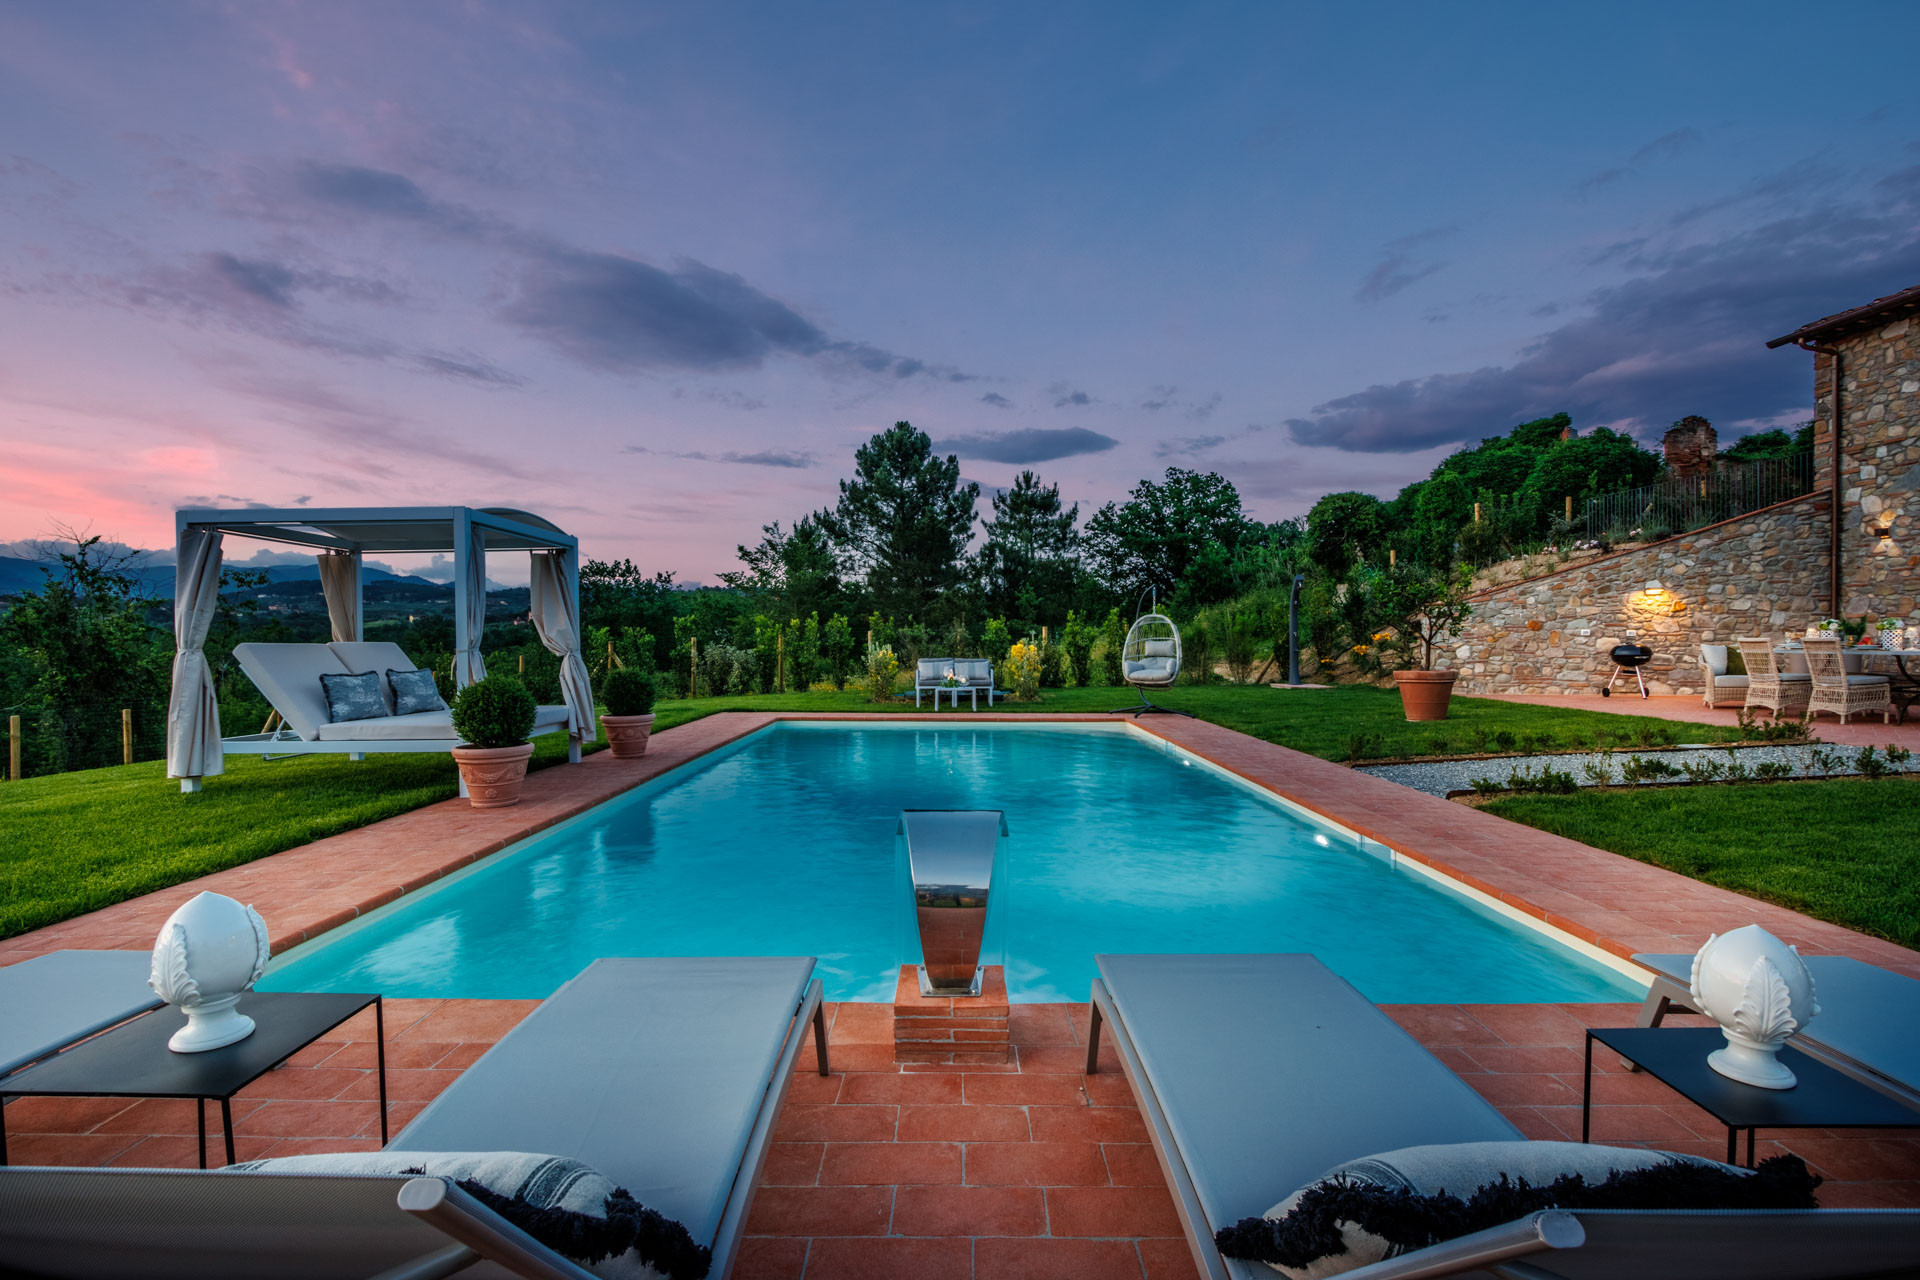 Villa/Dettached house in Montecarlo - Villa Flora, a Luxury 3 bedrooms Farmhouse with Pool and Jacuzzi